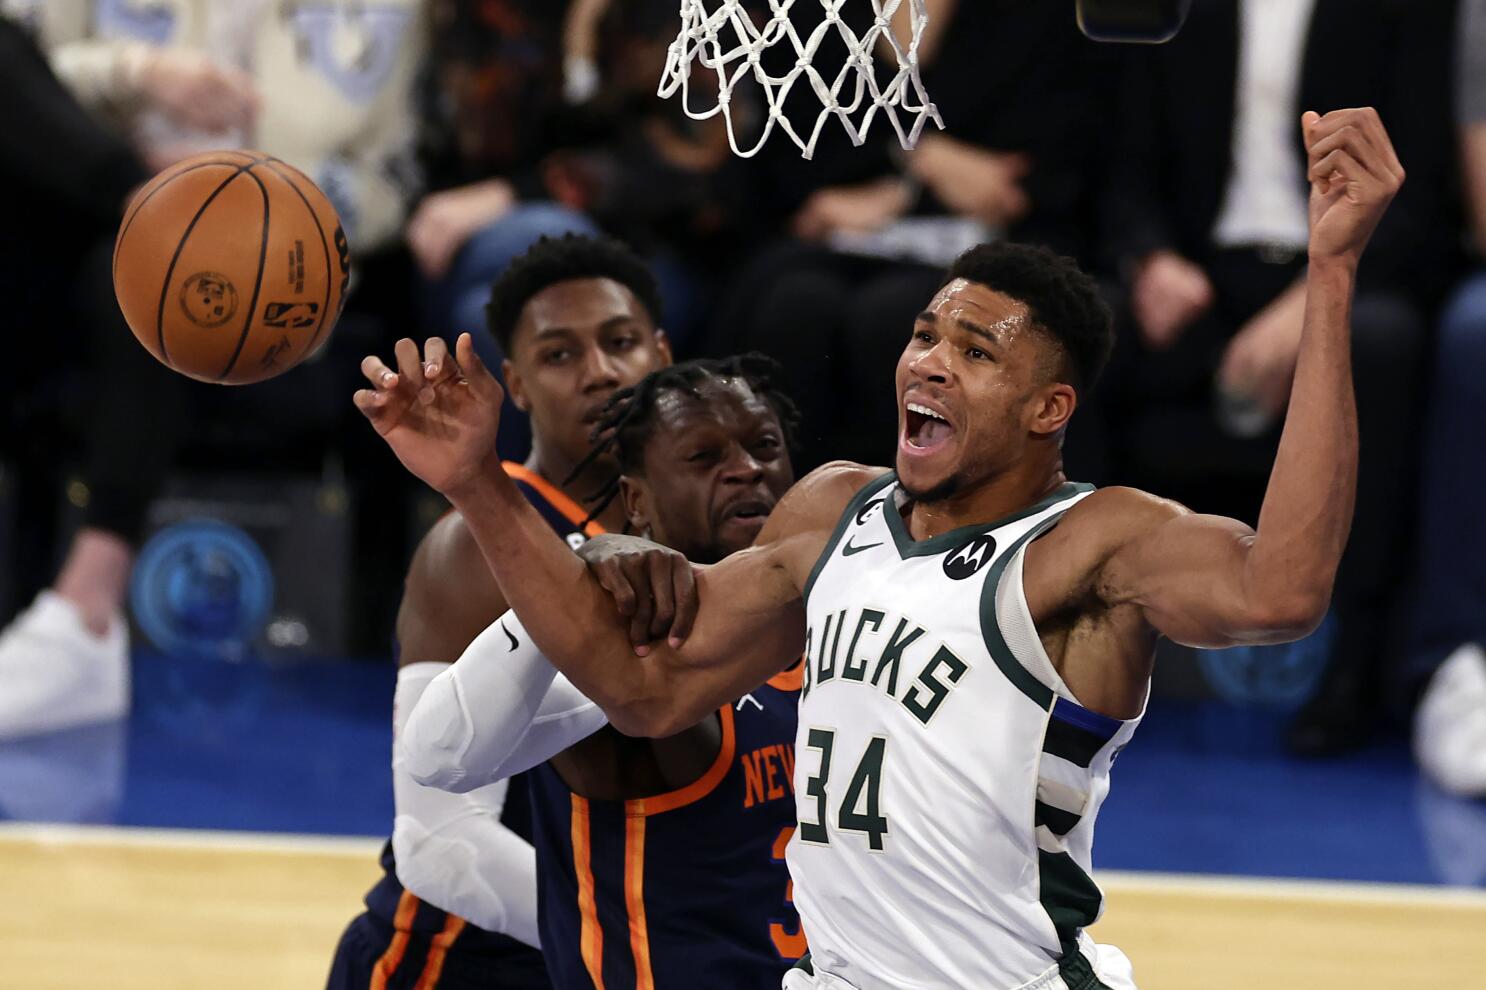 There's something special about the Bucks' Giannis Antetokounmpo